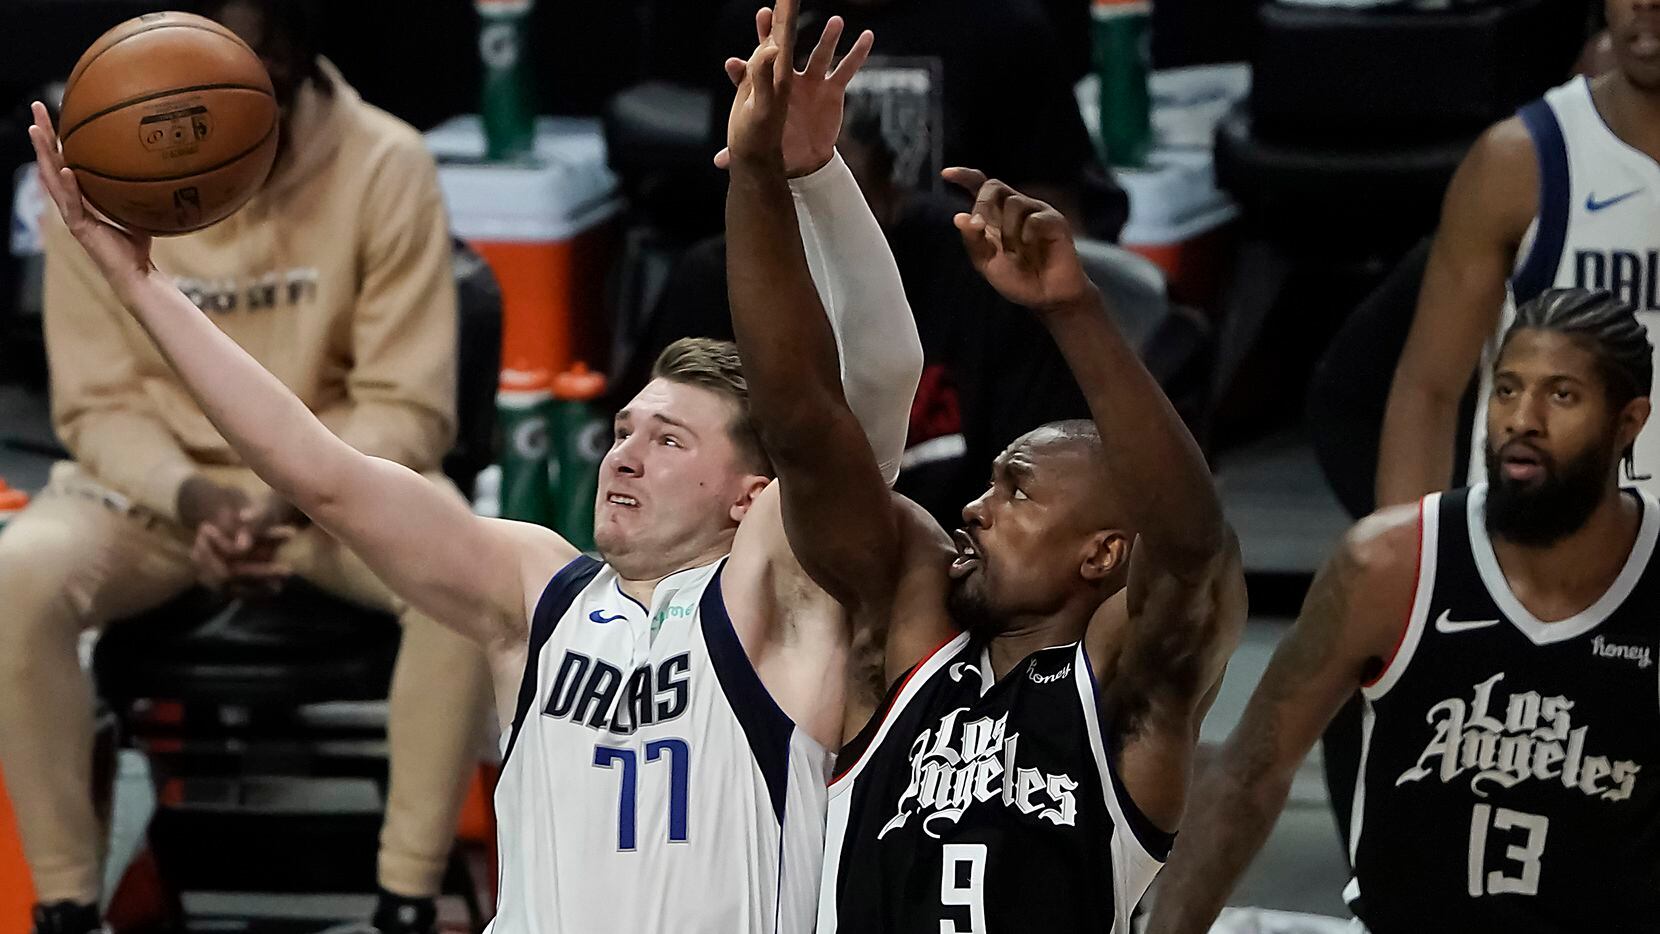 Dallas Mavericks guard Luka Doncic (77) drives to the basket past LA Clippers center Serge Ibaka (9) during the second half of an NBA playoff basketball game at Staples Center on Saturday, May 22, 2021, in Los Angeles. The Mavericks won the game 113-103. 